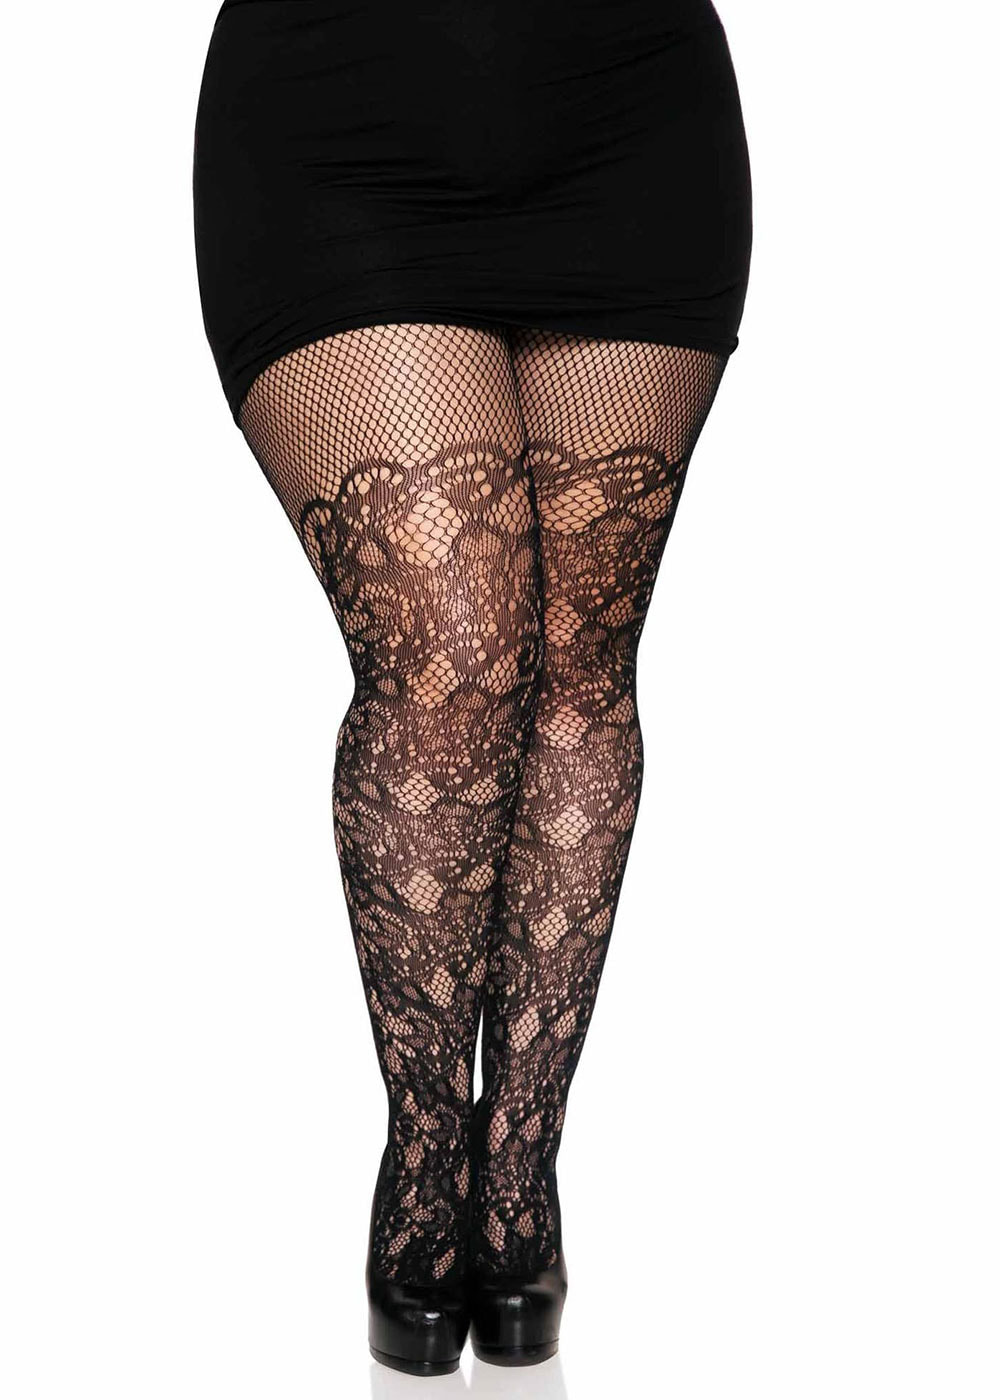  Women's Tights - XL / Women's Tights / Women's Socks & Hosiery:  Clothing, Shoes & Jewelry